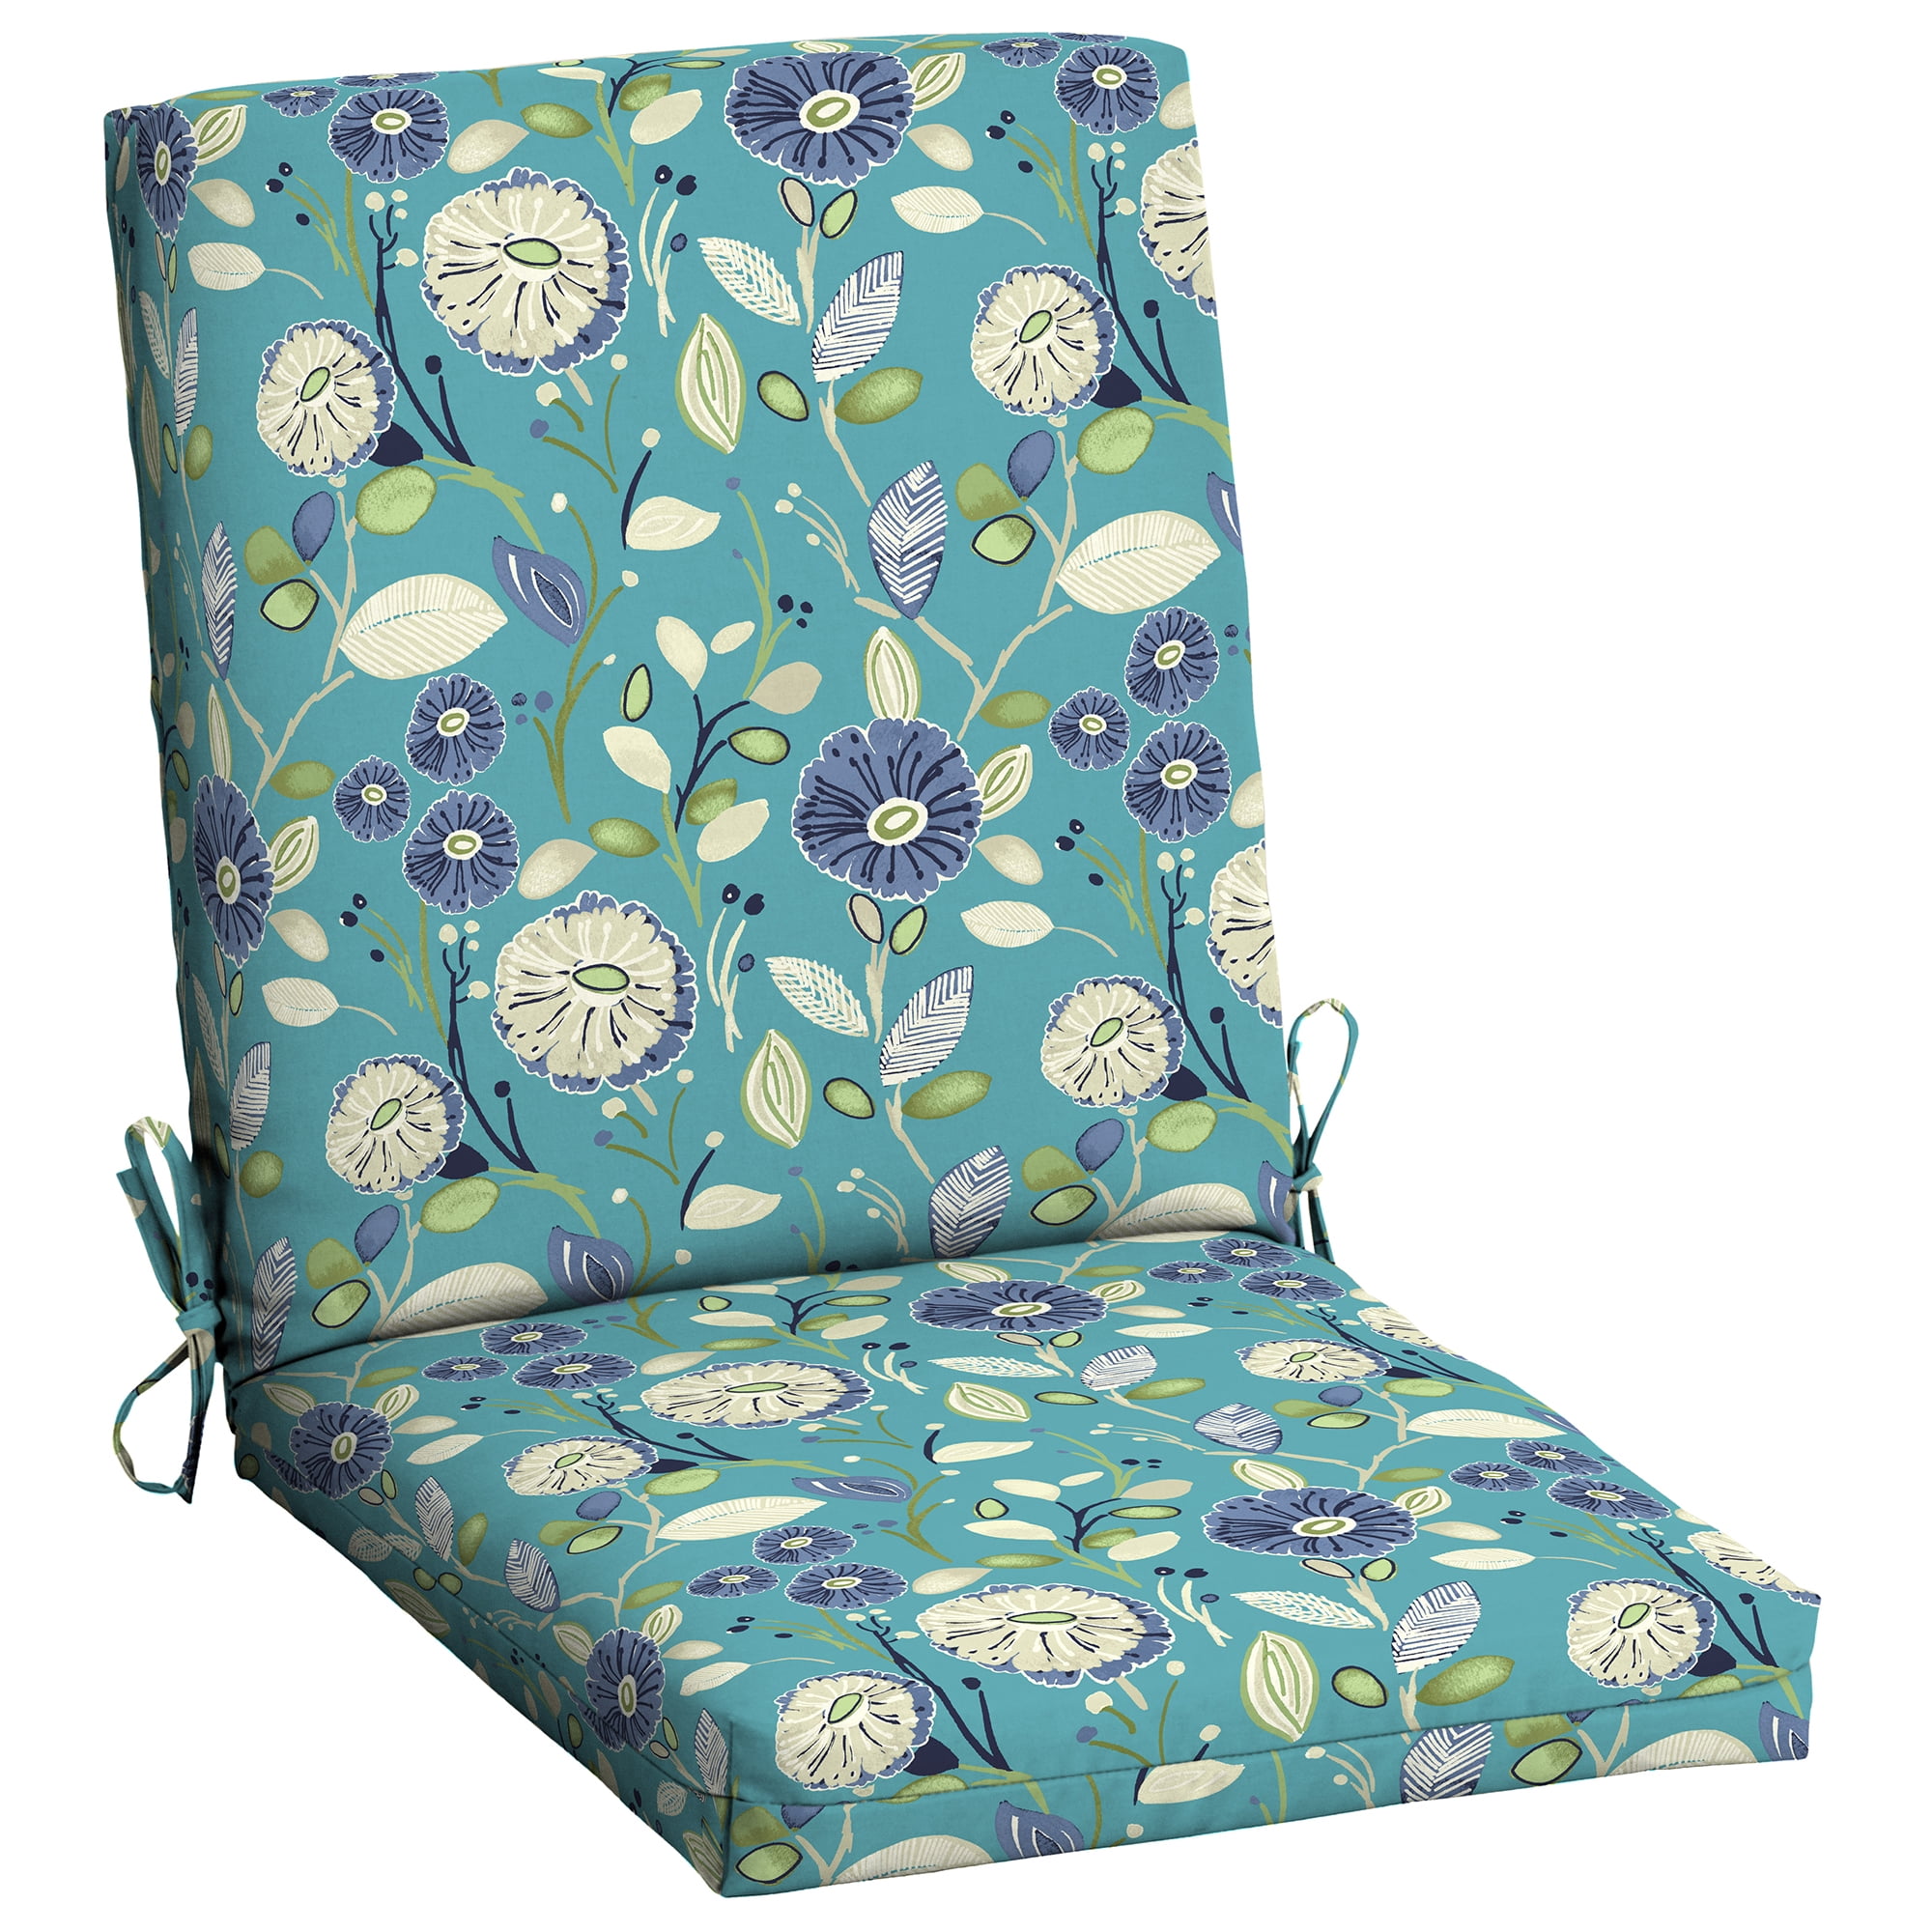 Mainstays Blue Floral 1 Piece Outdoor Dining Chair Cushion - Walmart